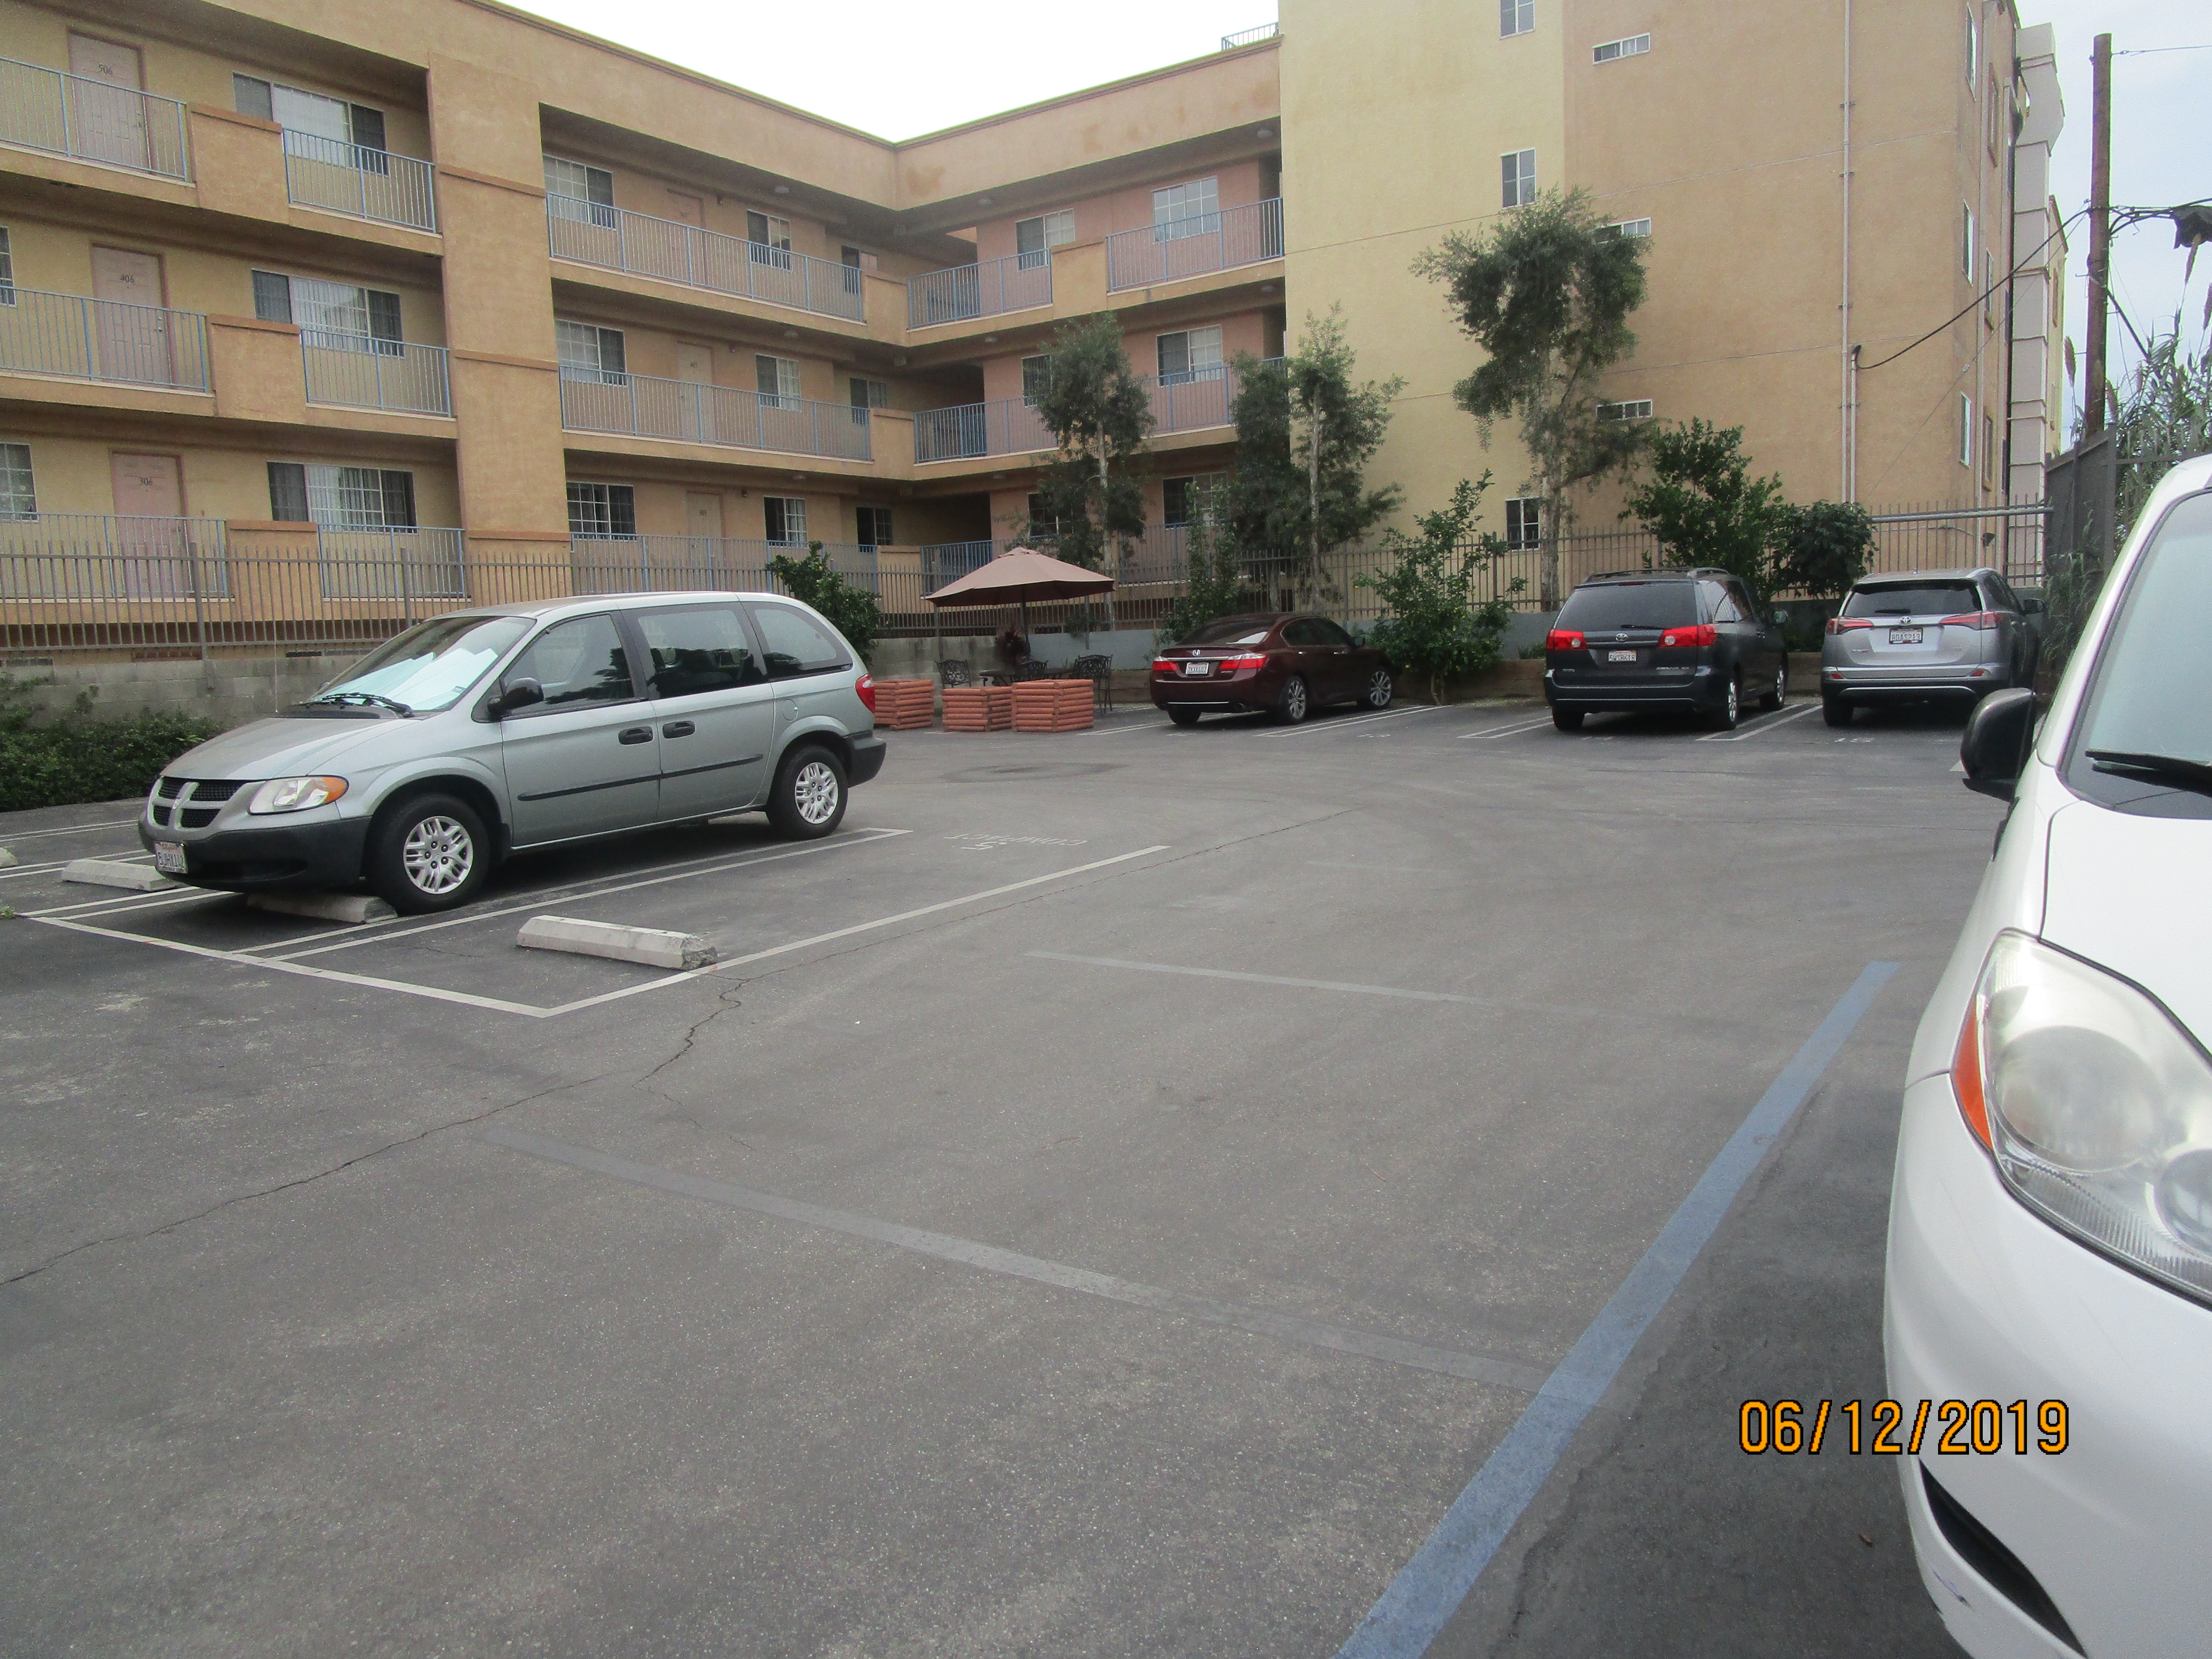 Image of the building parking lot with few cars parked